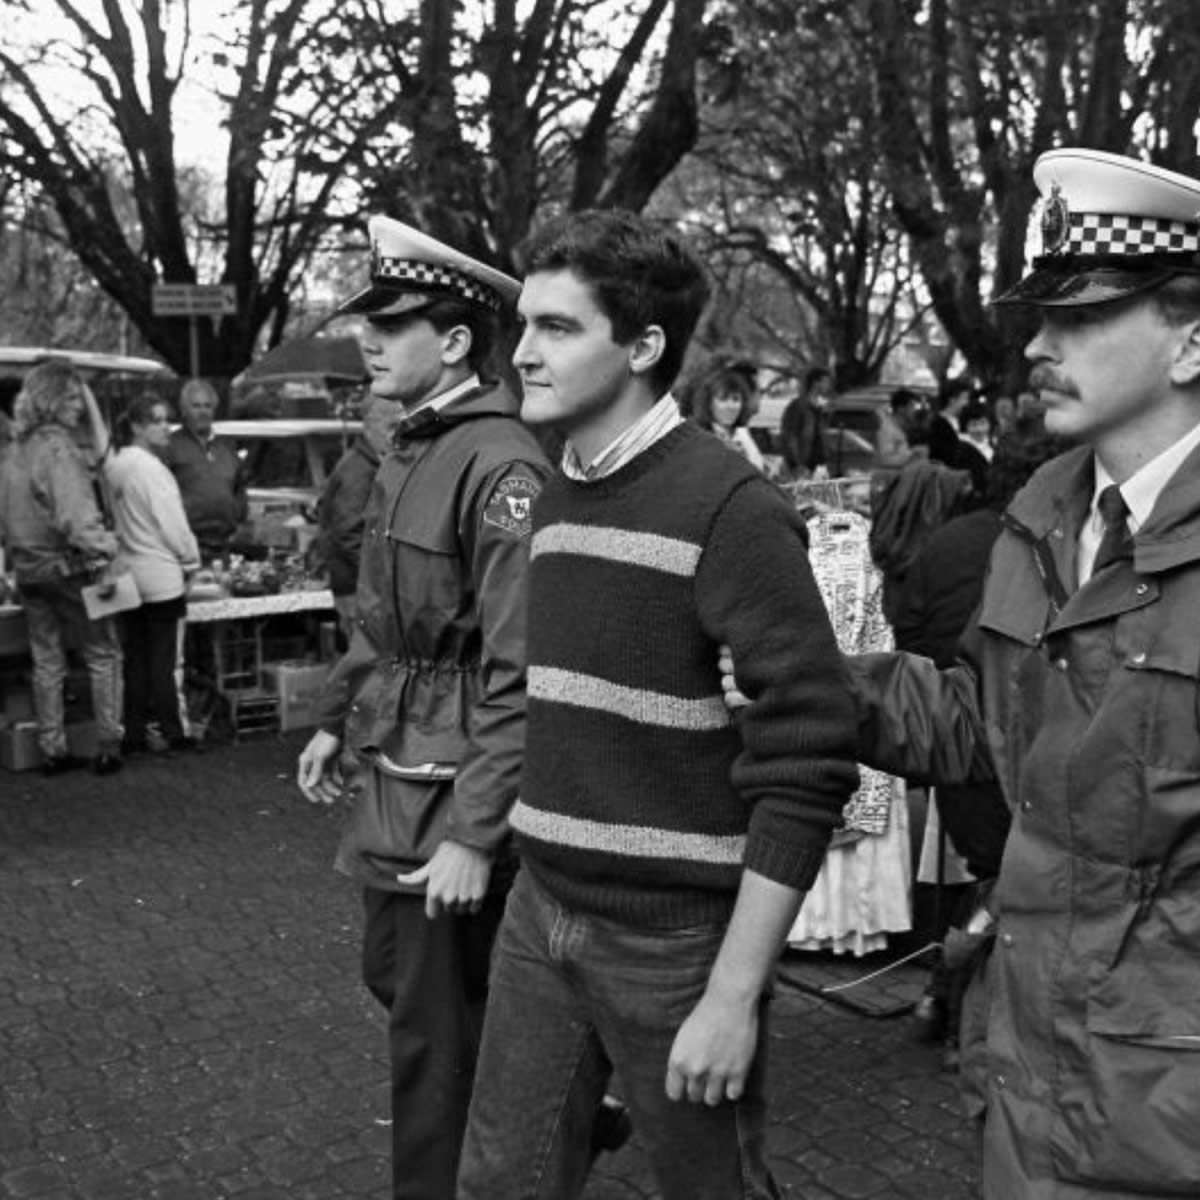 Black and white photo of gay activist Rodney Croome being escorted from the 1998 Salamanca Market gay rights protests by a police officer.